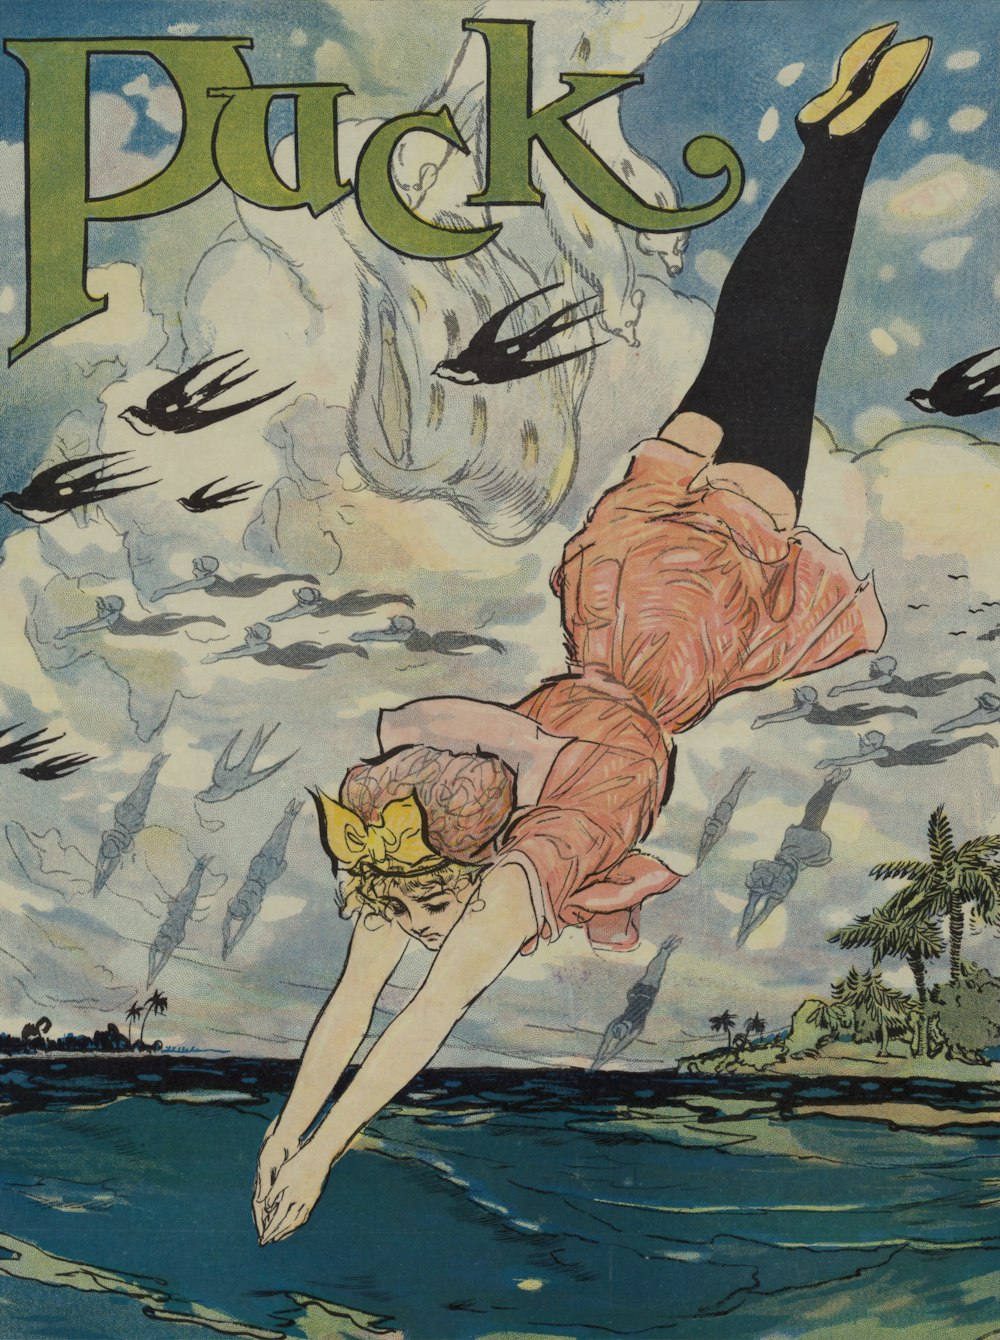 From Maine to Florida. Cartoon illustration by Gordon Ross and published for Puck Magazine, 1911. 